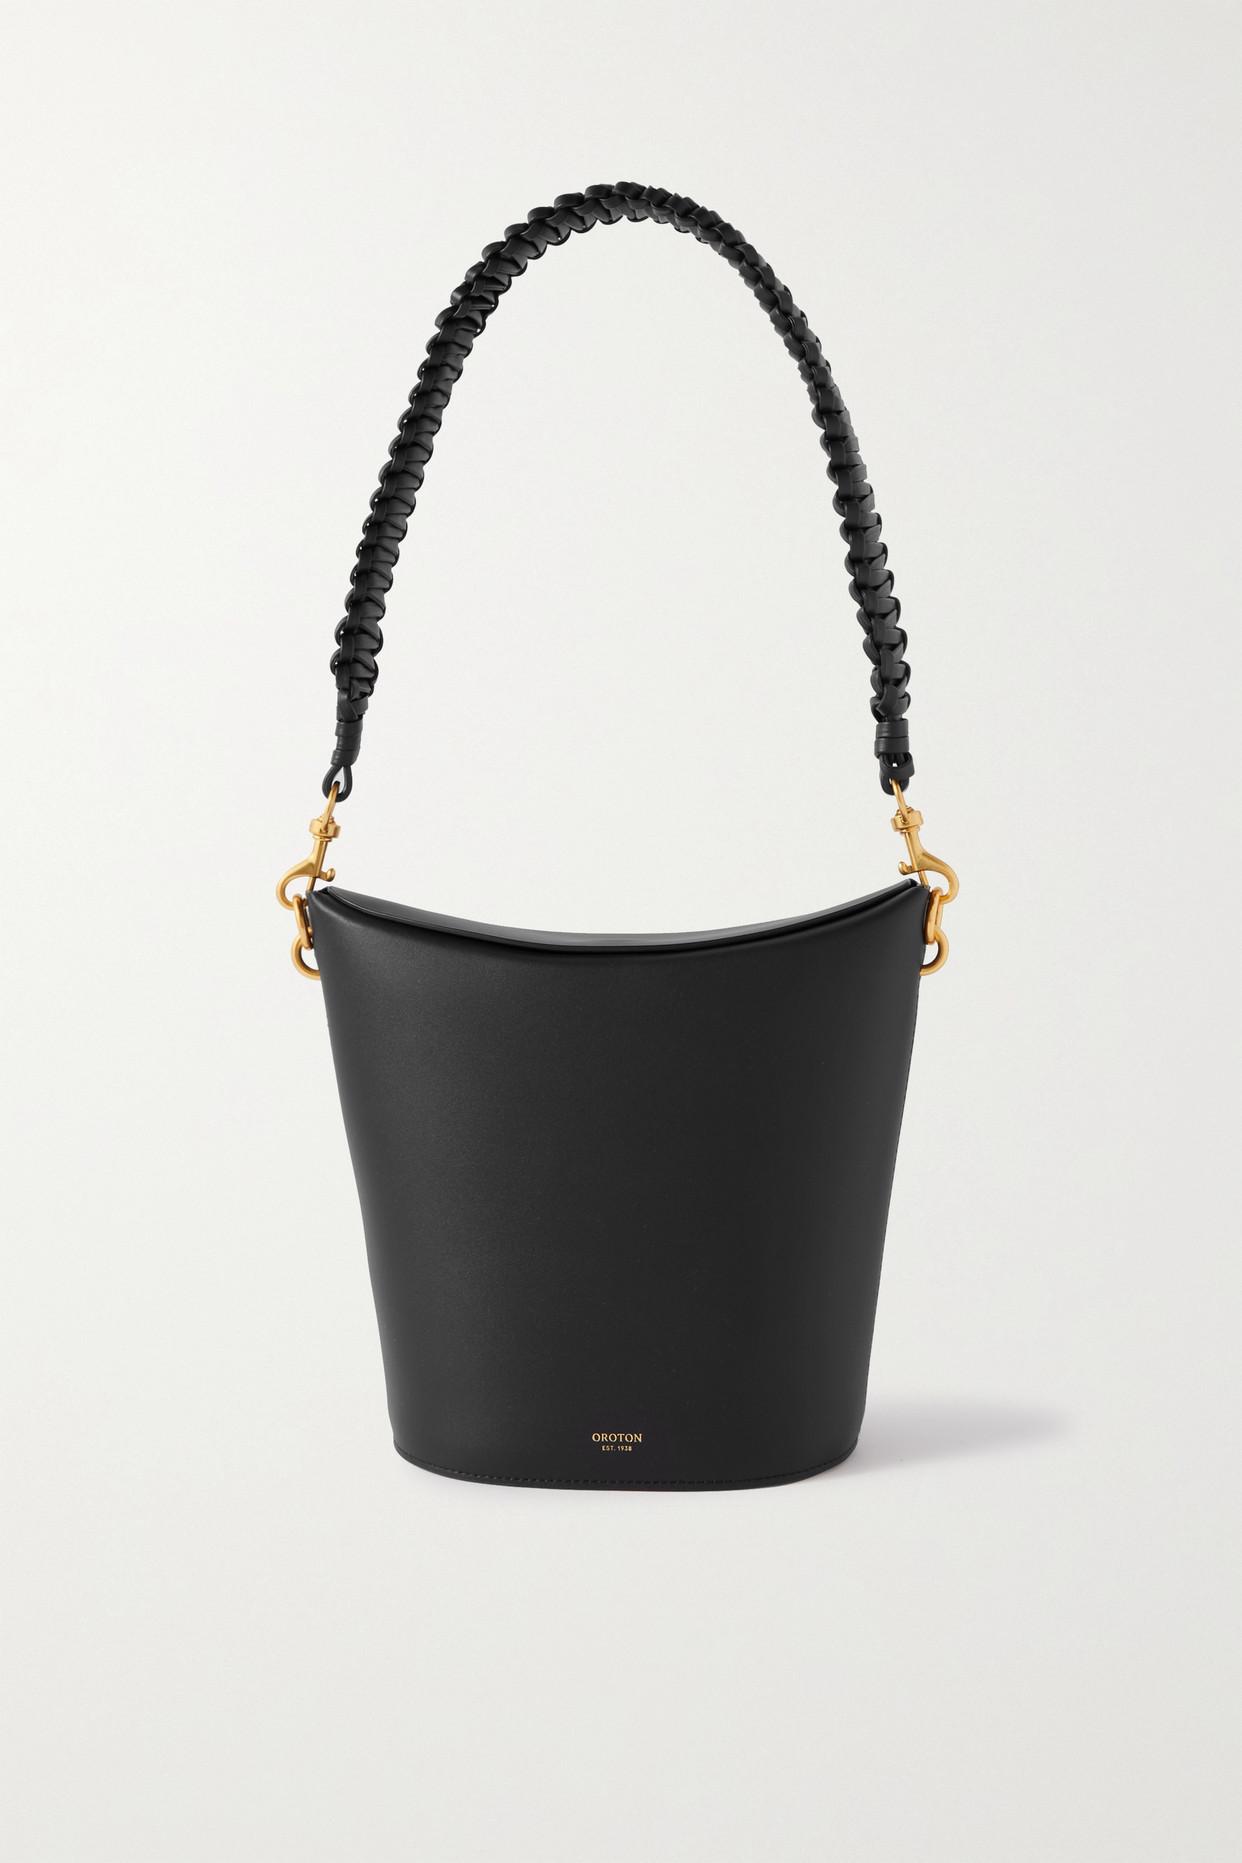 Oroton Brie Leather Bucket Bag in Black | Lyst